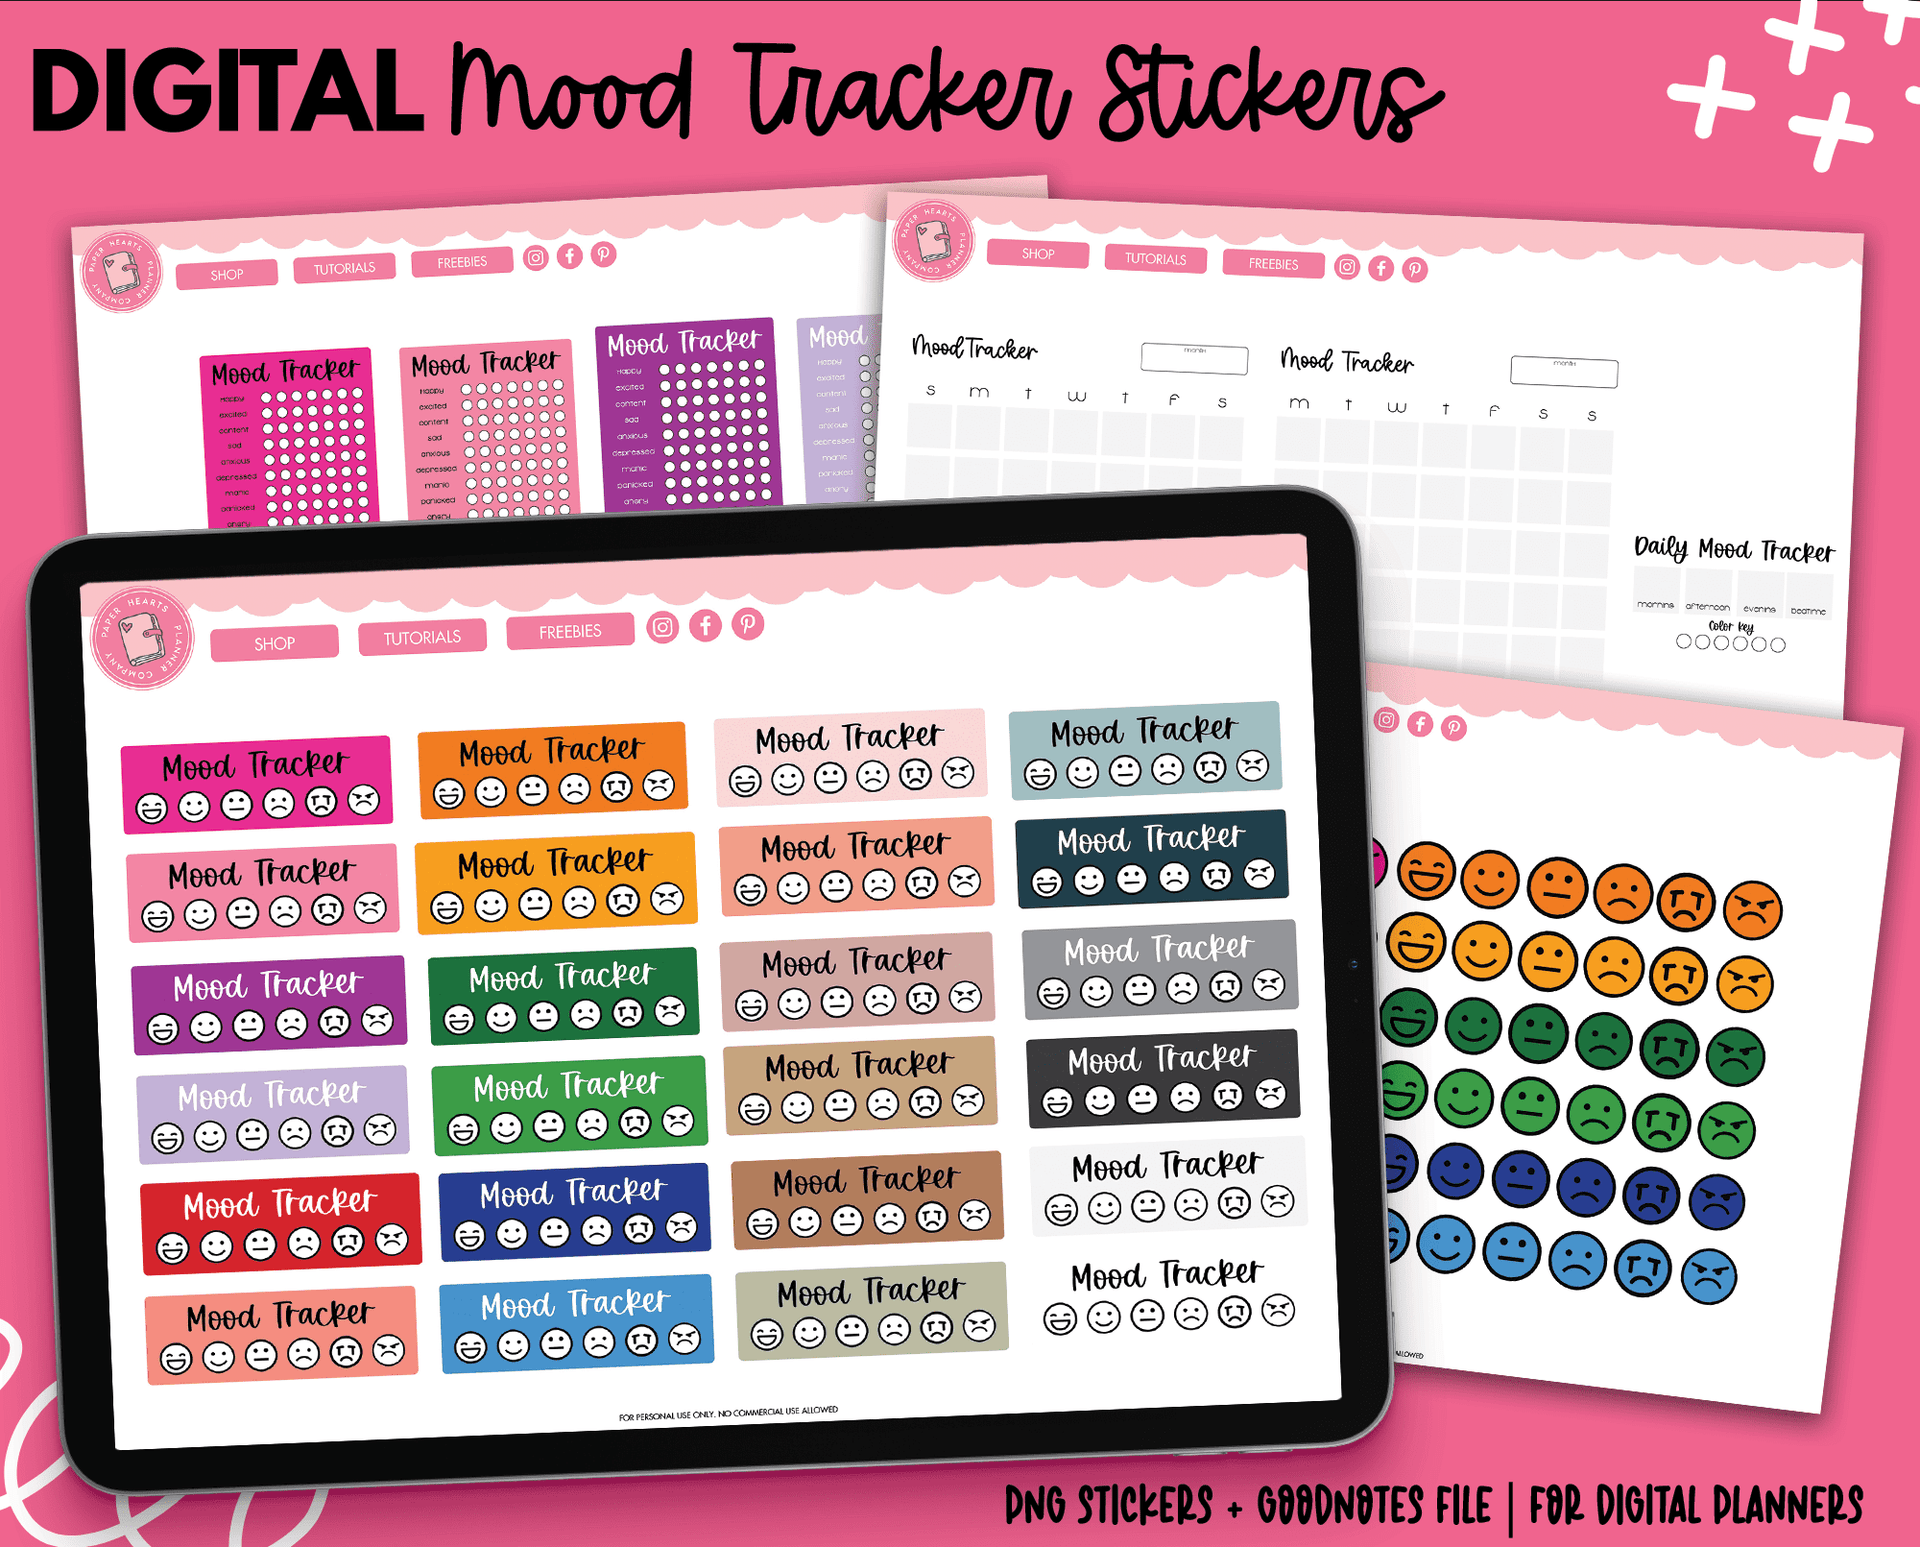 I'm feeling Mini mood tracking sticker sheet – Made in His Image